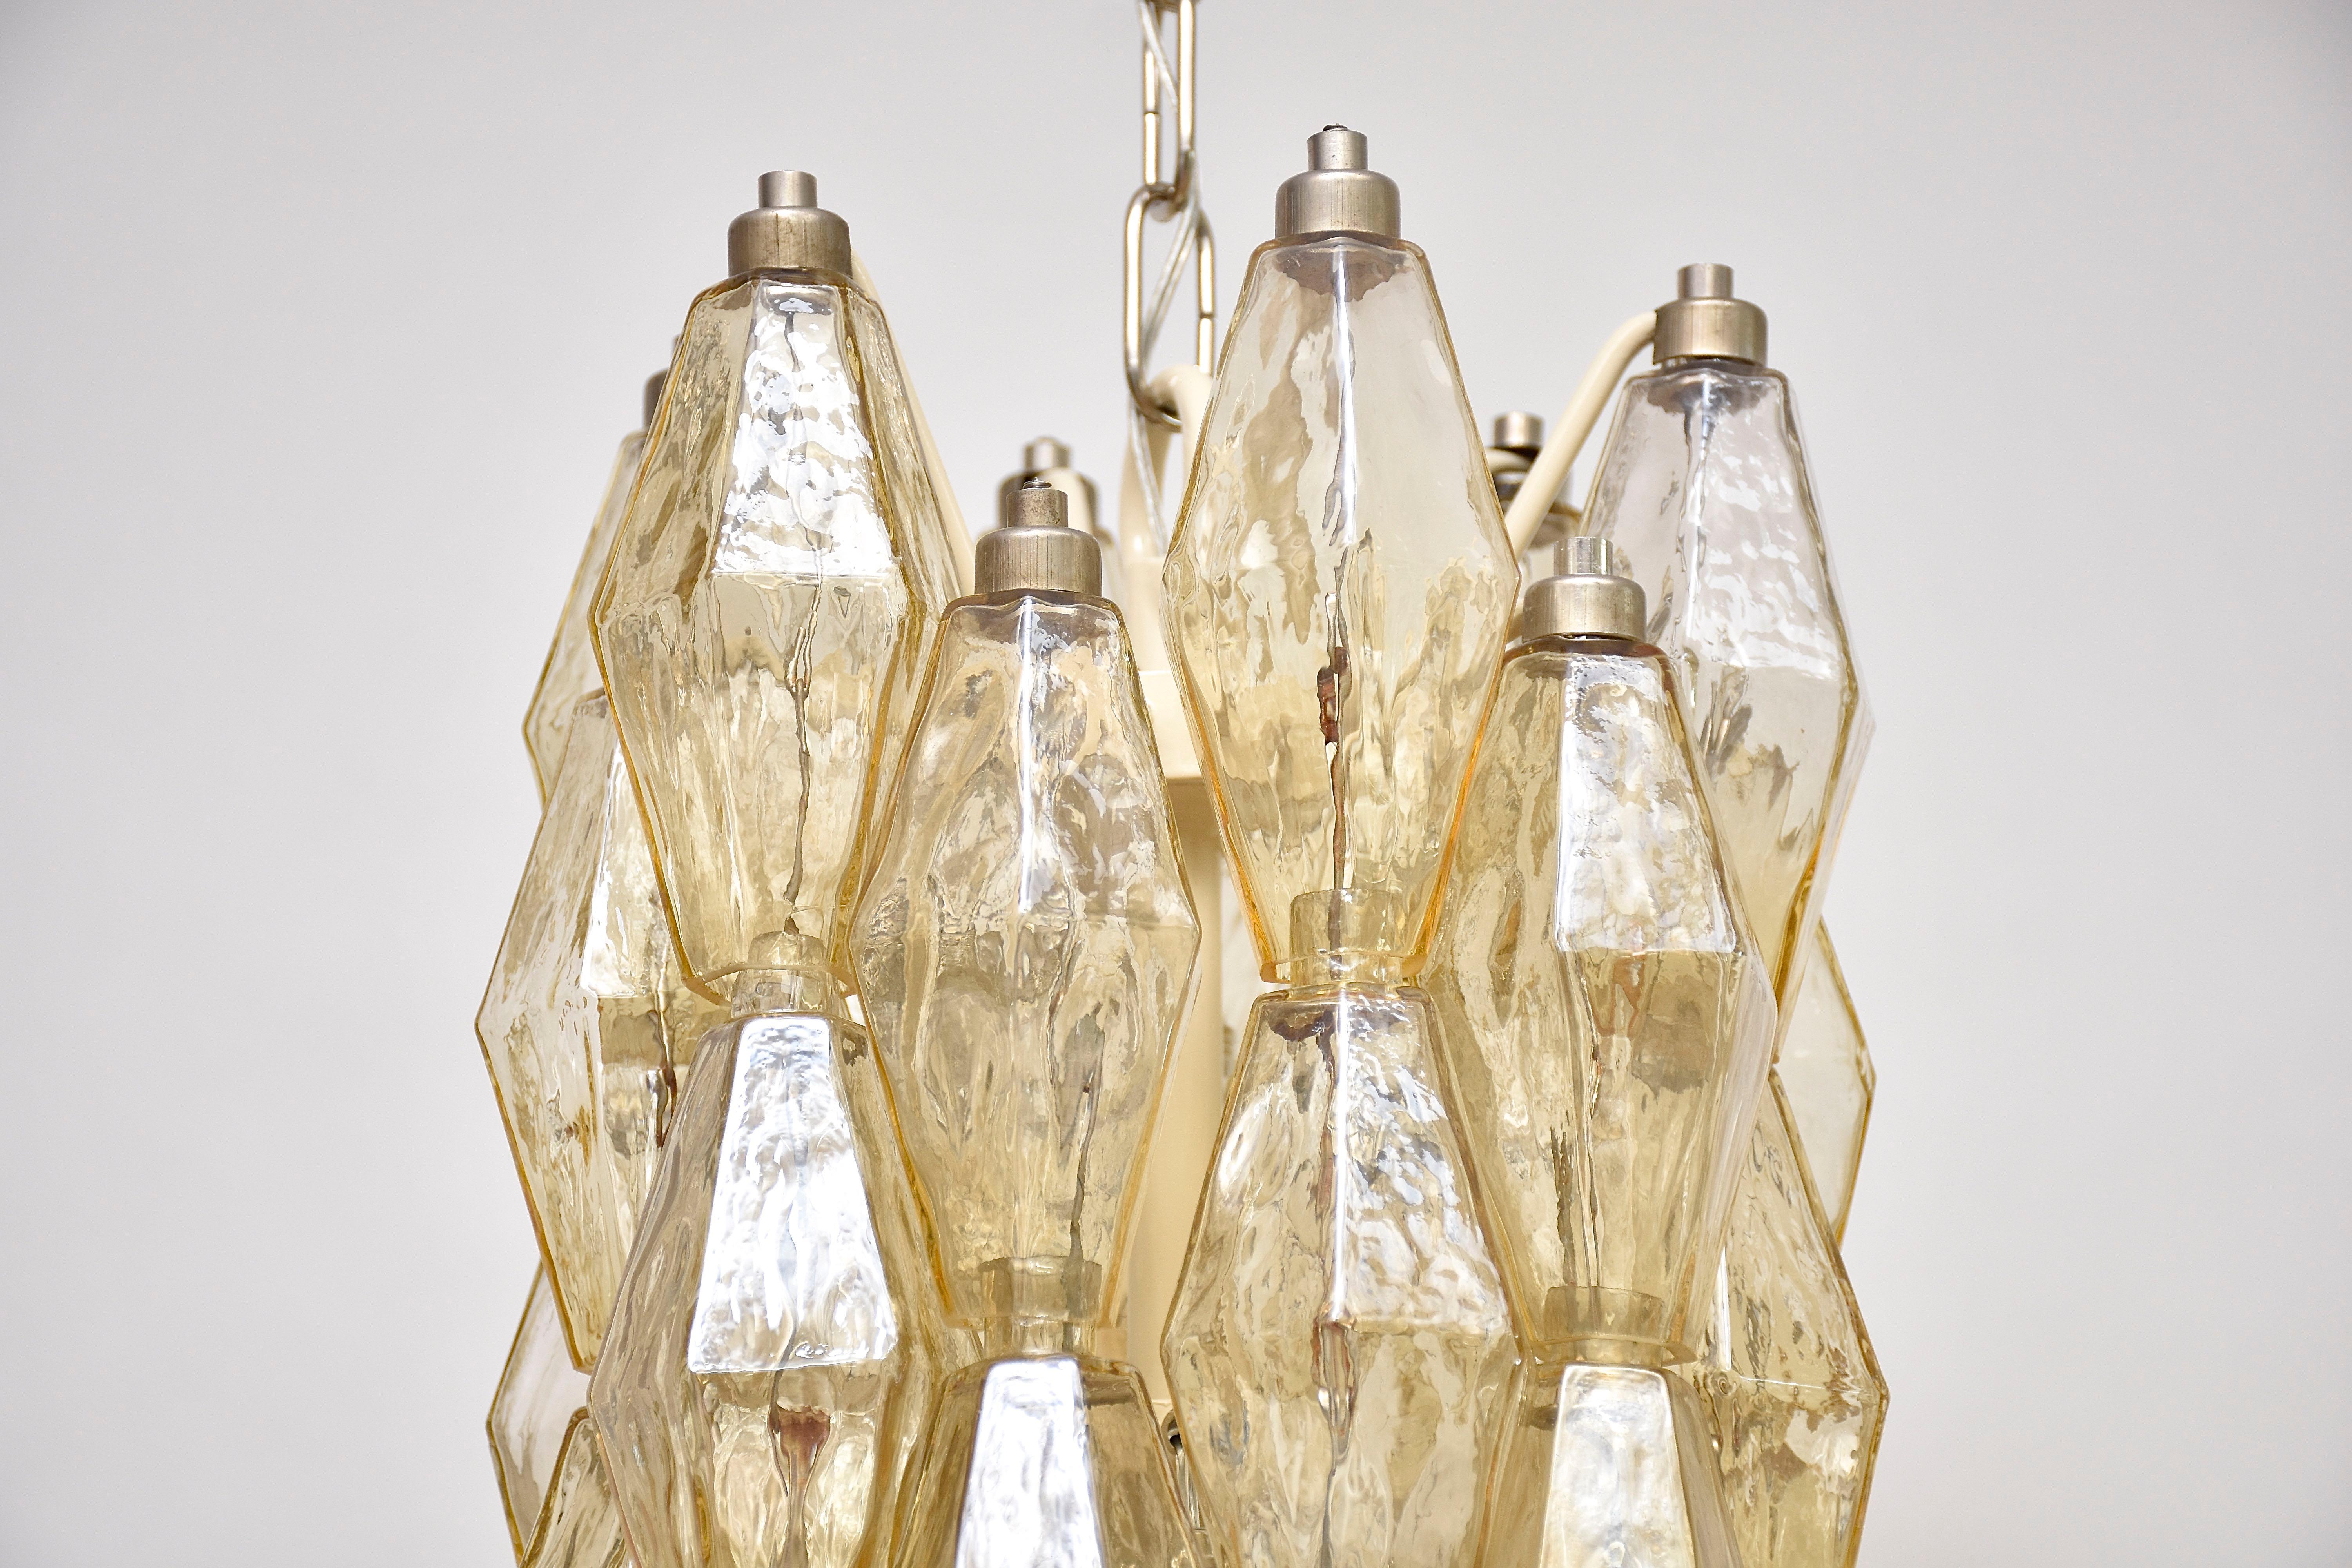 A very beautiful and original pair Murano chandeliers designed by Italian architect and designer Carlo Scarpa for Venini Murano.
Each with 9 lights.
Beautiful design where the advanced technique is visible.
With soft yellow /gold slightly iridescent